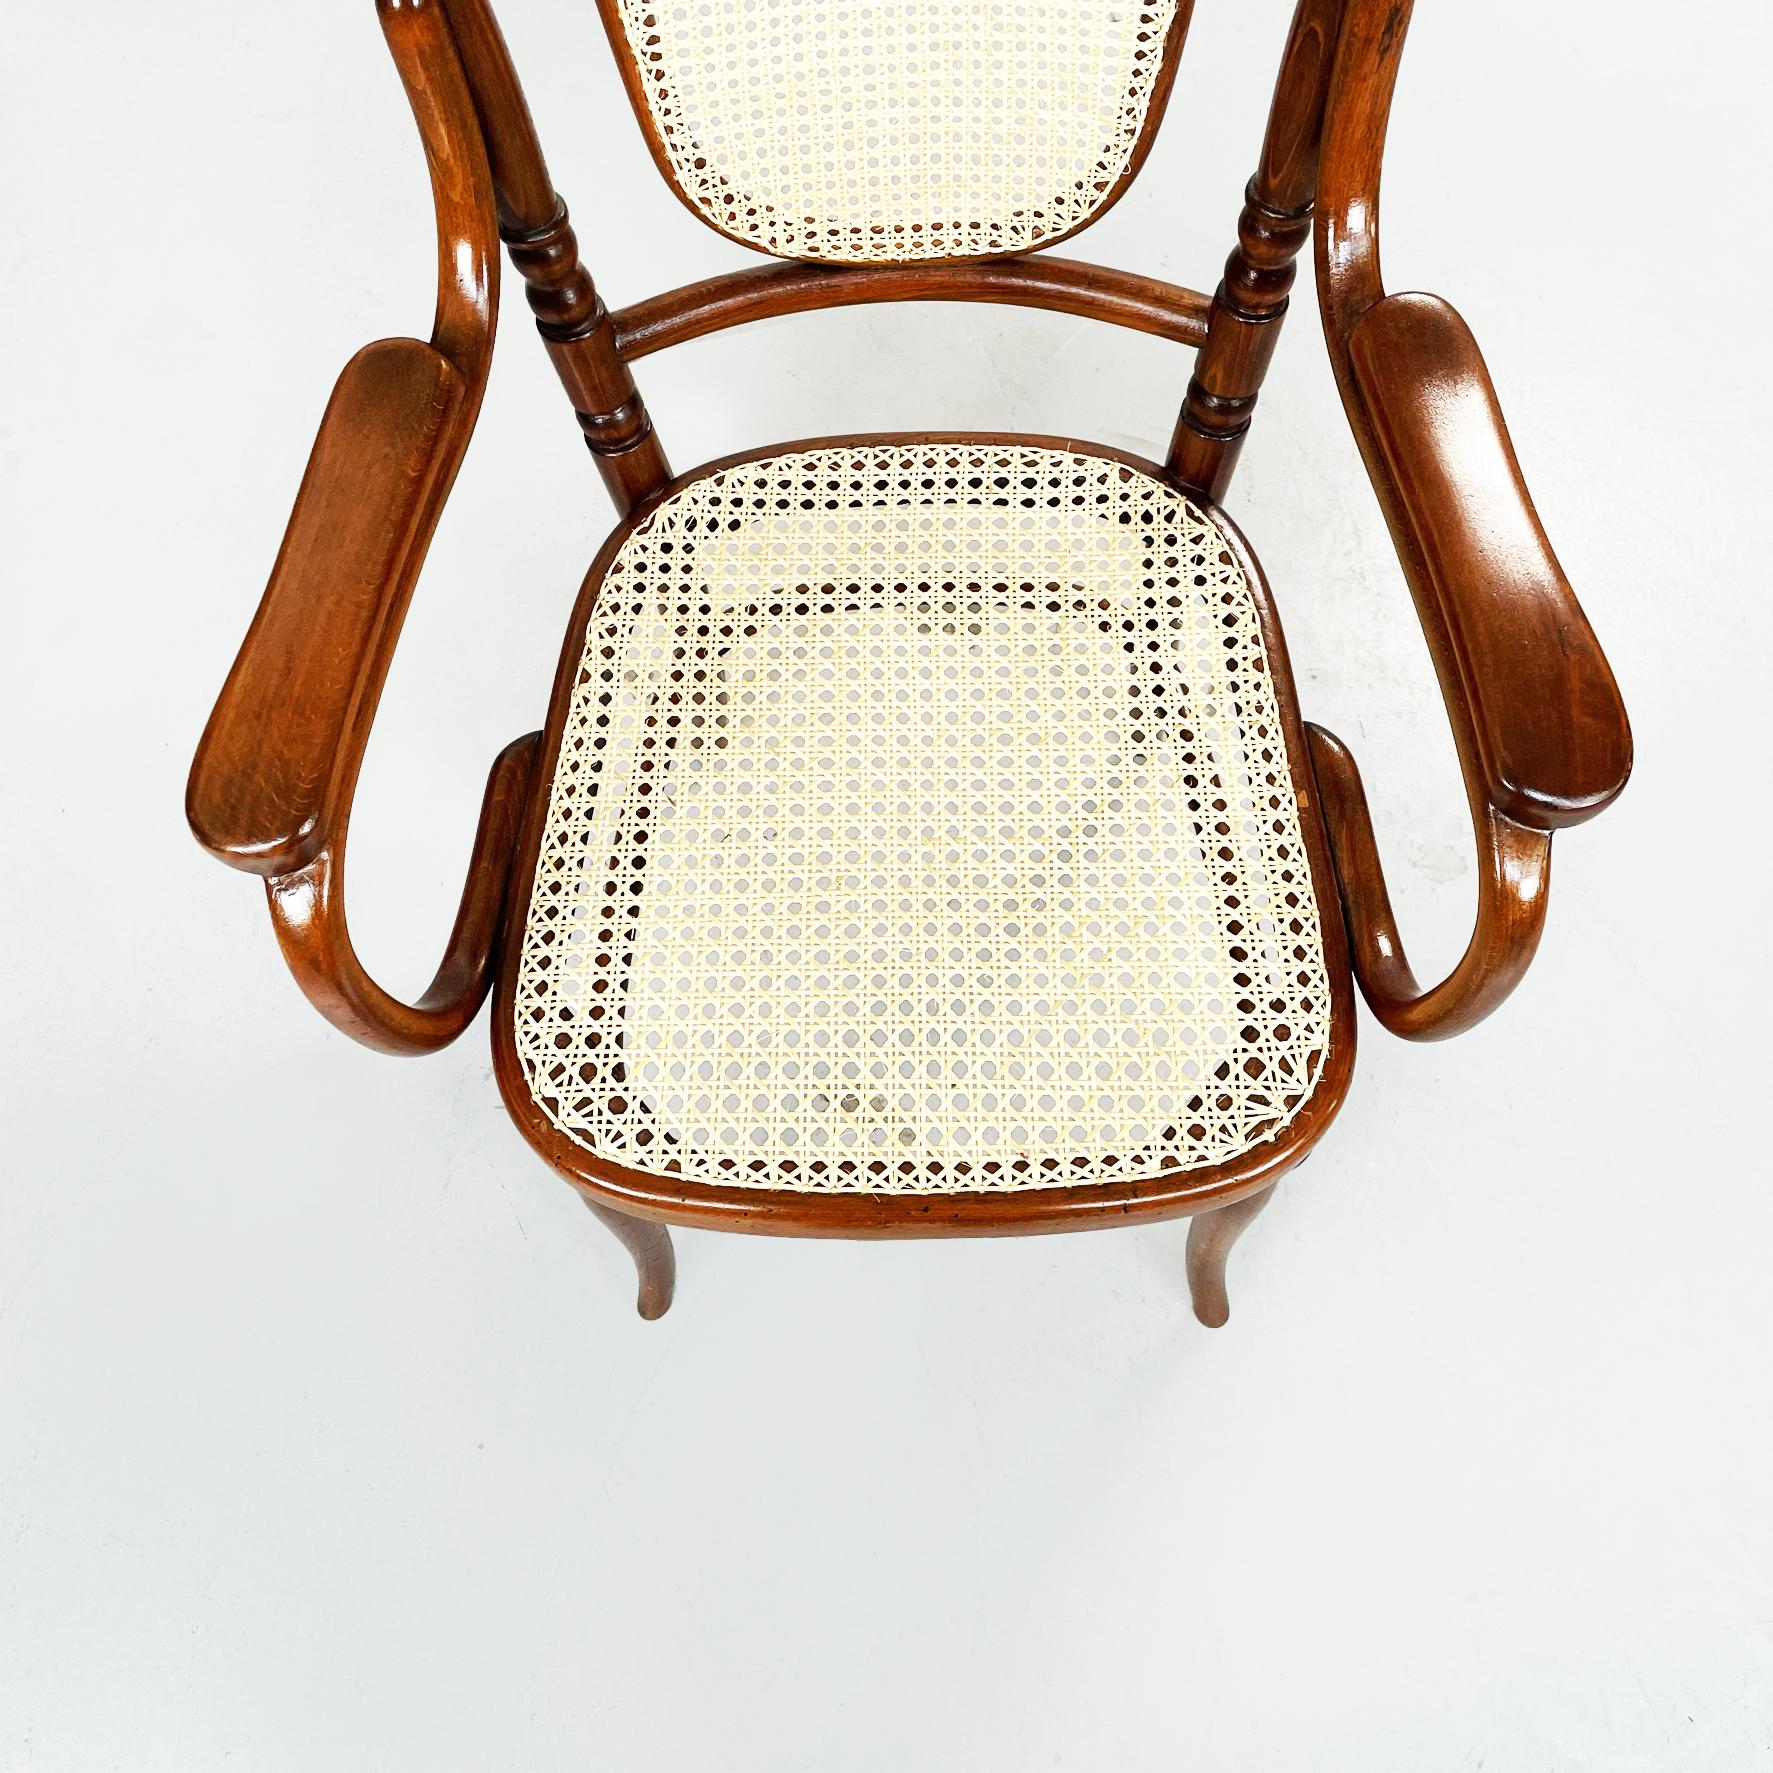 Austrian Chairs with Straw and Wood by Thonet, 1900s For Sale 2